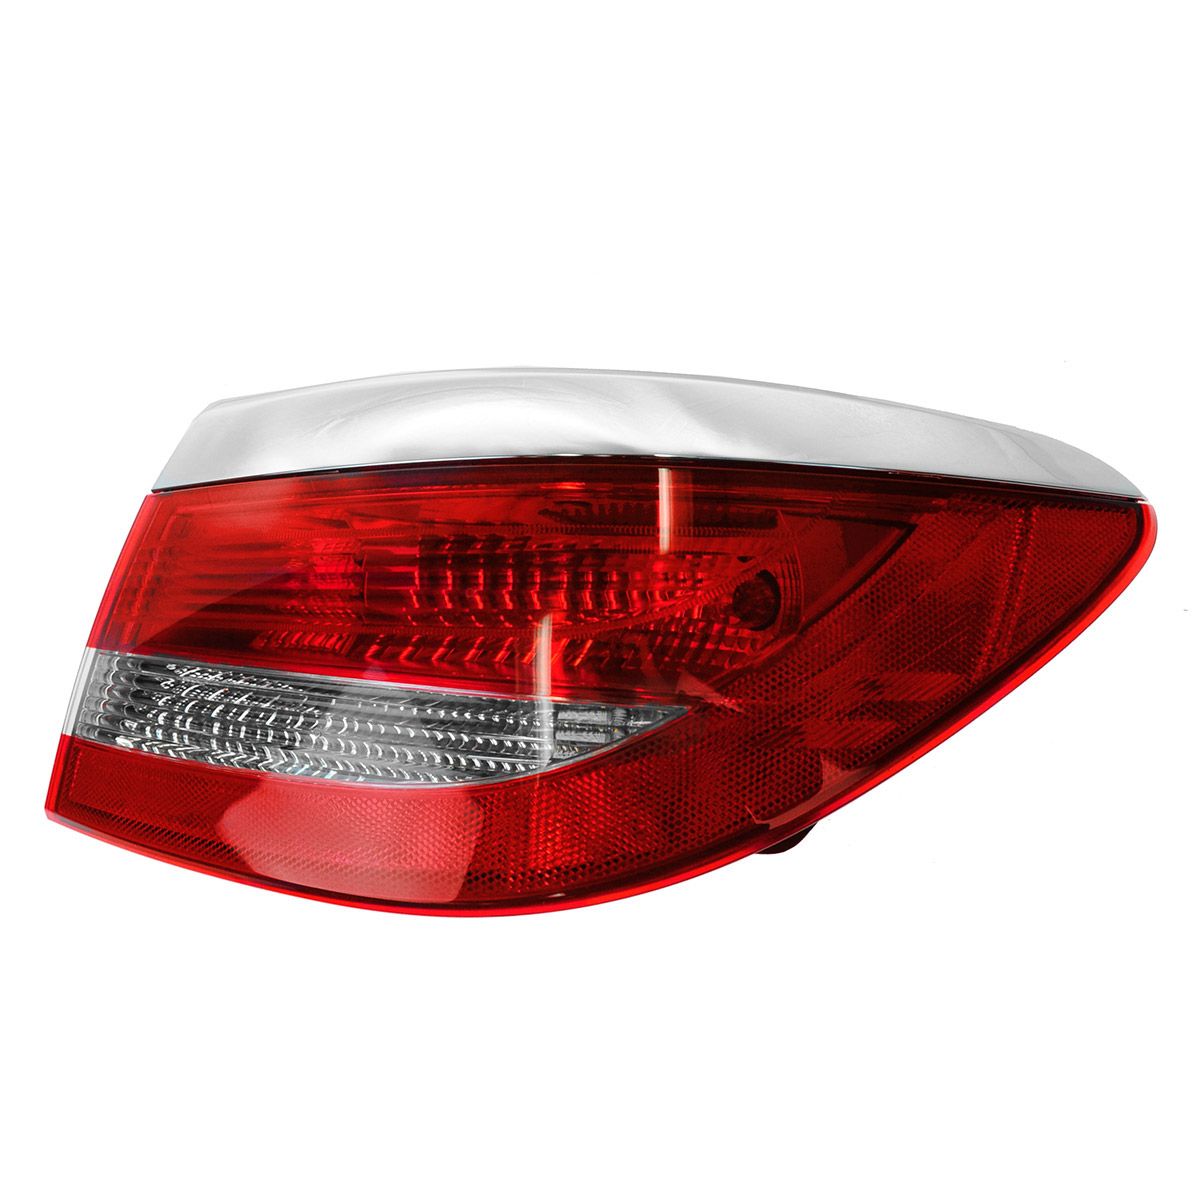 Taillight Tail Lamp Outer Passenger Side Right RH RR for 12-17 Buick Verano NEW | eBay 2012 Buick Verano Tail Light Bulb Replacement